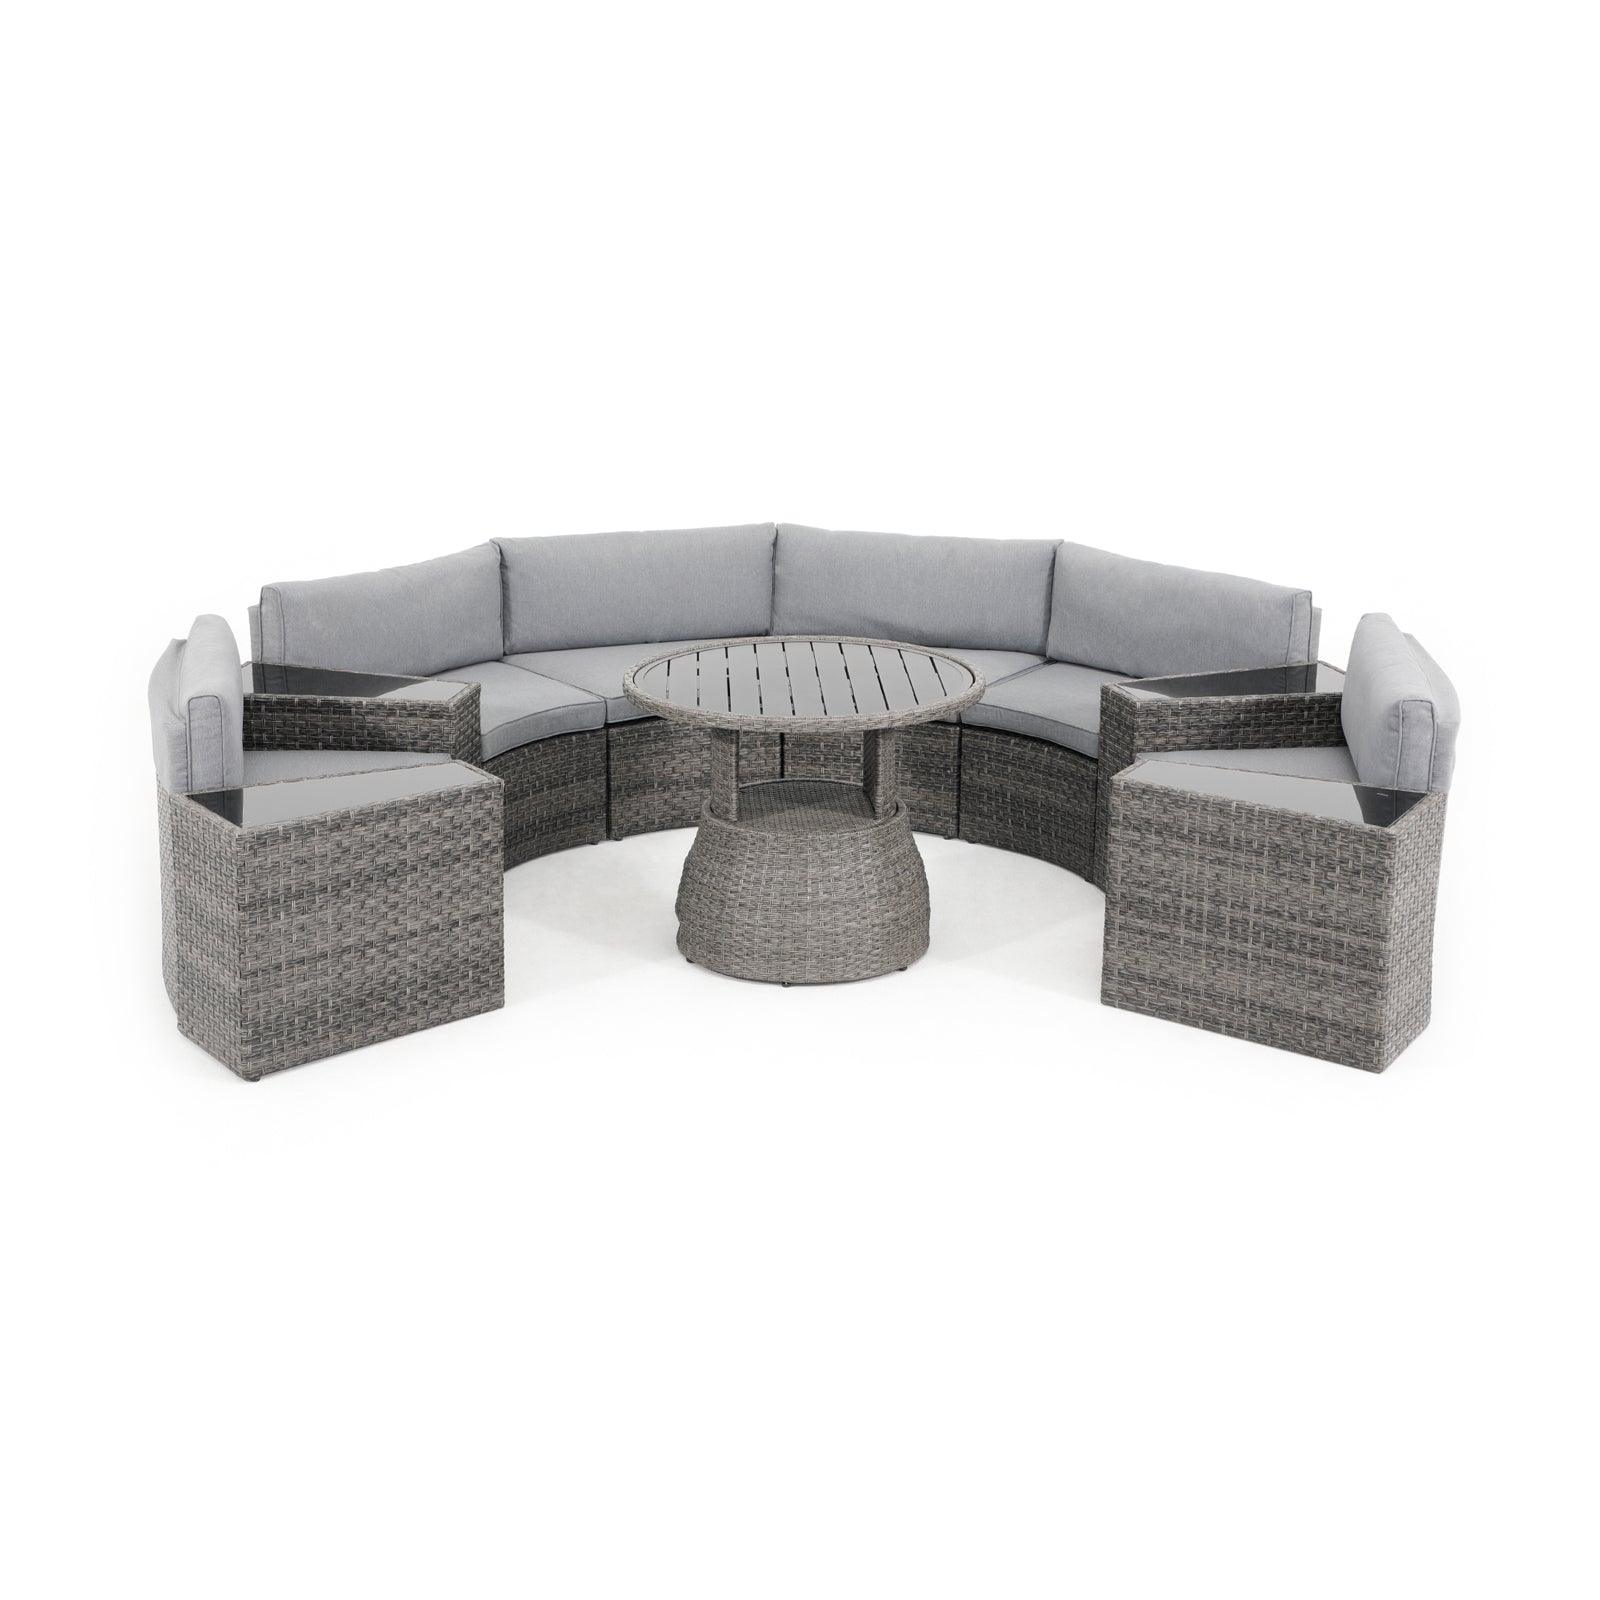 Boboli 6-seater Grey Outdoor Wicker Curved Sectional sofas with grey cushions + 4 wicker side tables + 1 Lift-top round table(expand), front view - Jardina Furniture#color_Grey#piece_11-pc.